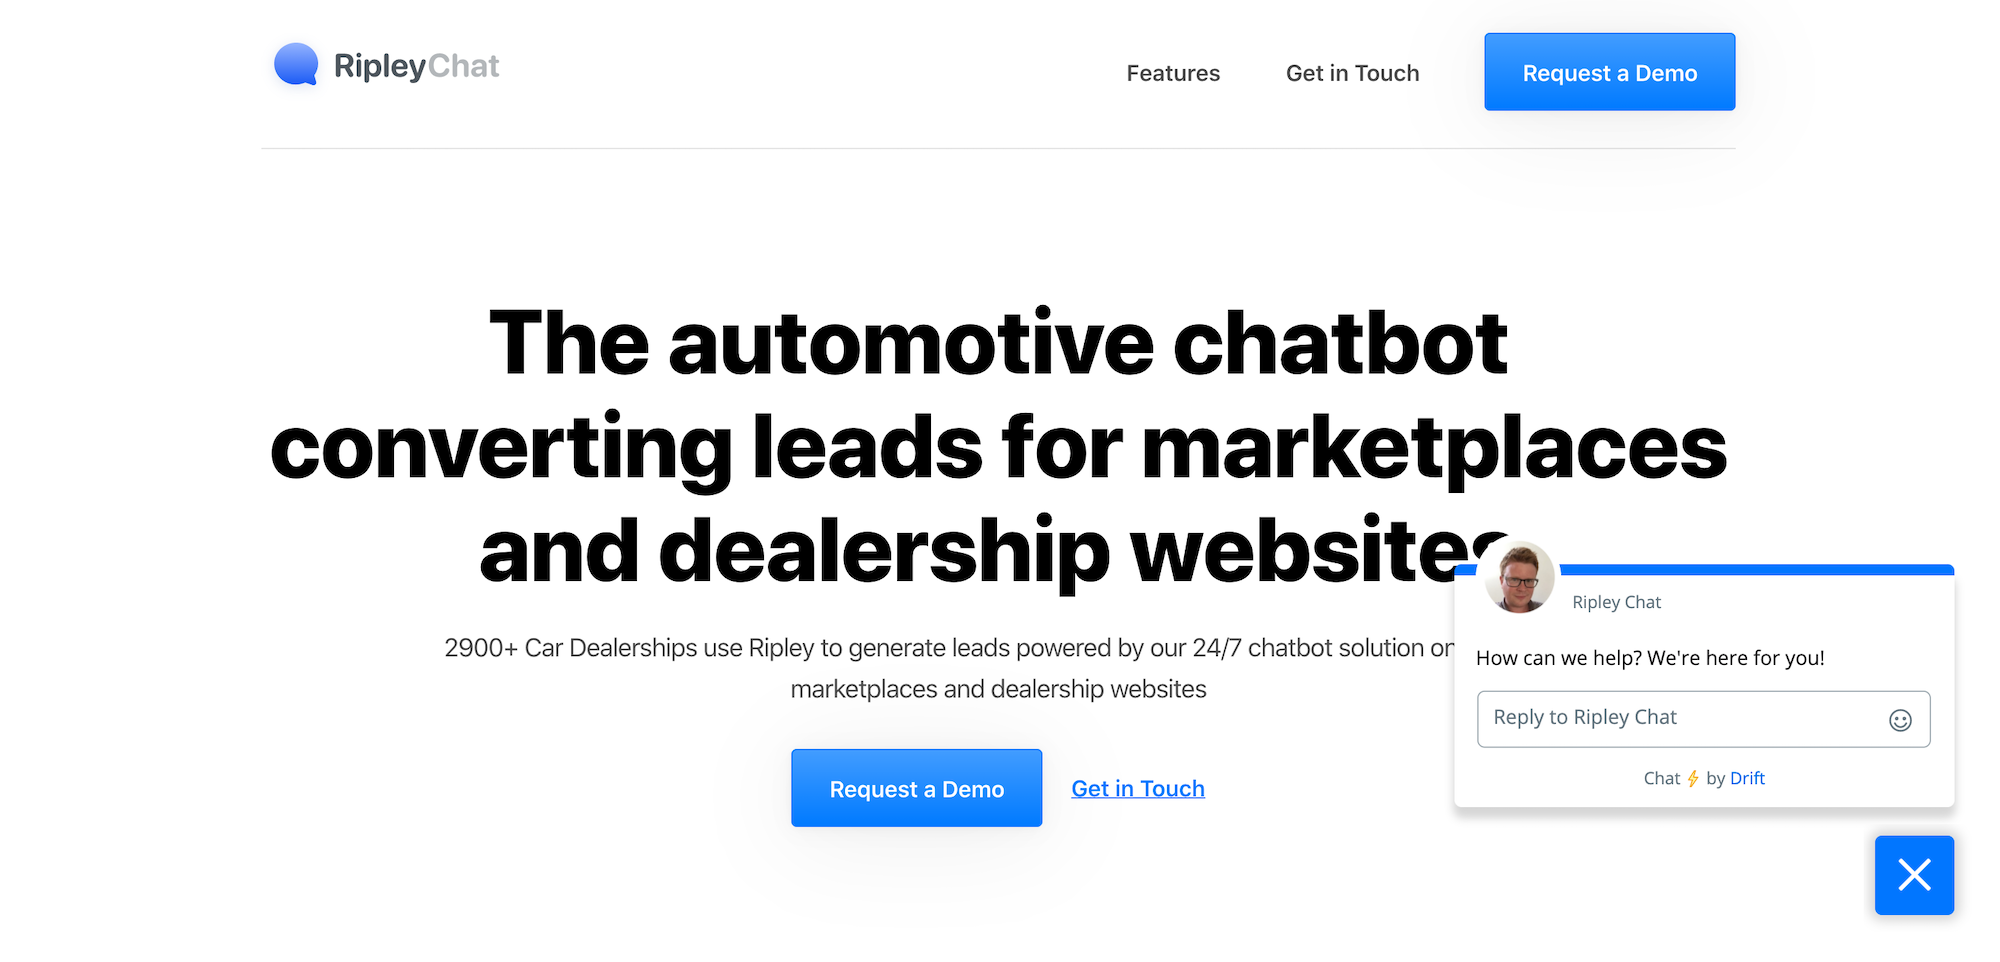 CarChat24 Blog - Learn About Live Auto Dealer Chat Software